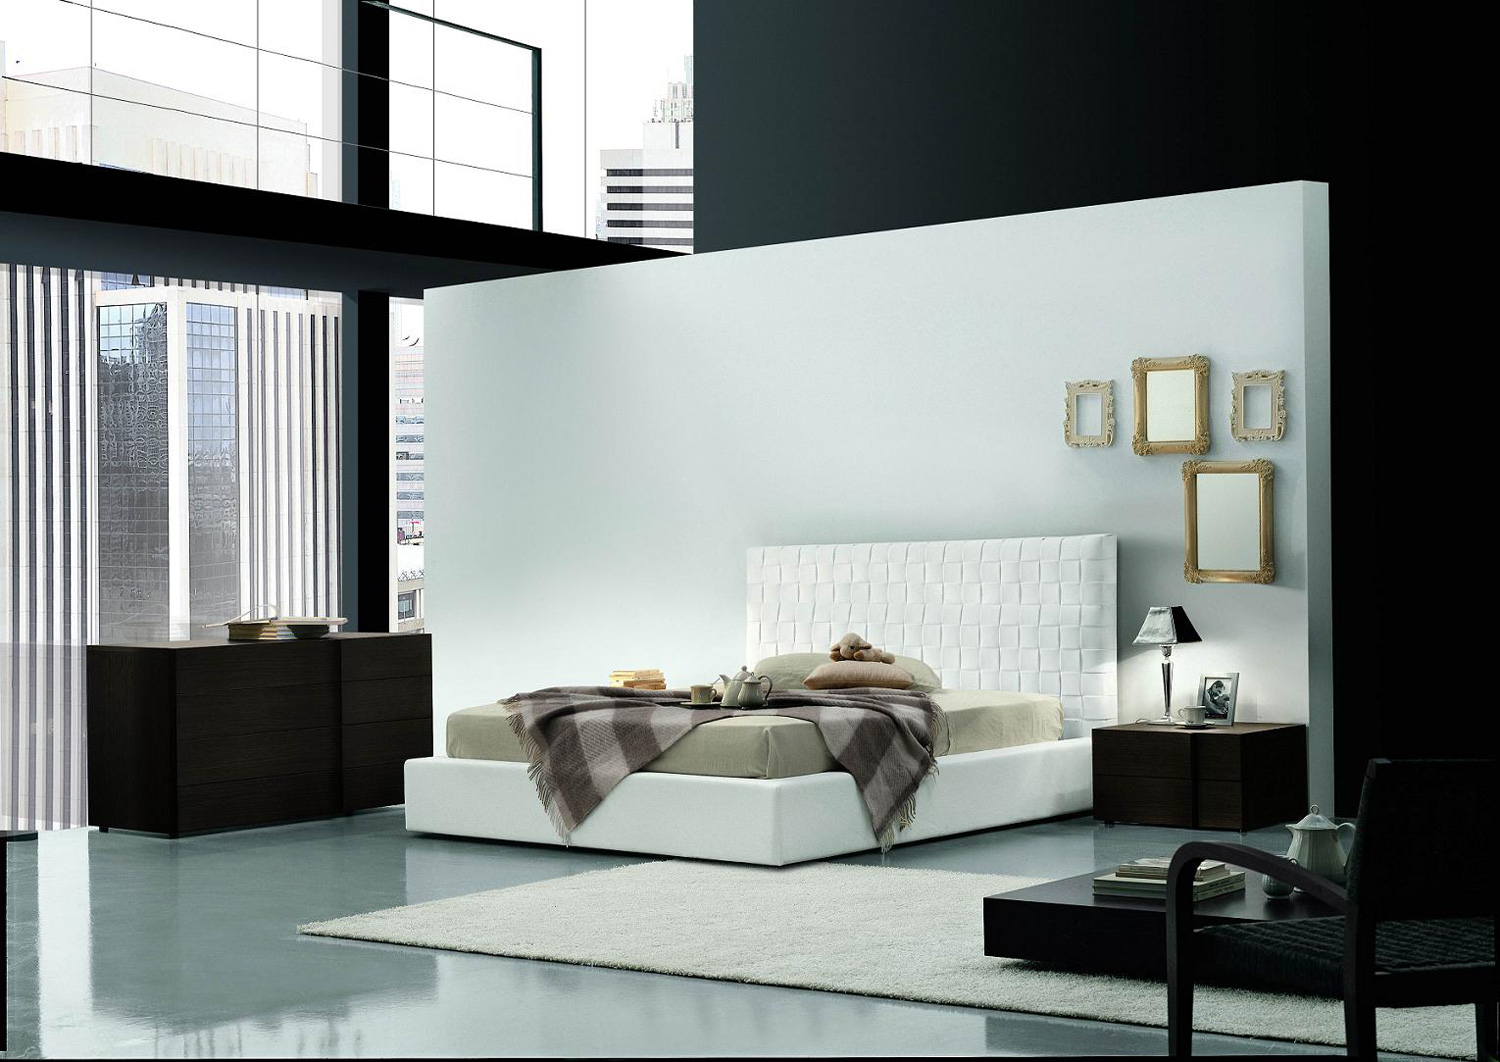 And Black Design White And Black Interior Bedroom Design Along With Modern Black Wooden Bedroom Furniture Sets Also Simple White Wall Bedroom Design With Smooth Ceramic Flooring Bedroom Design Ideas Furniture Best Bedroom Furniture Sets To Browse Through For Inspiration